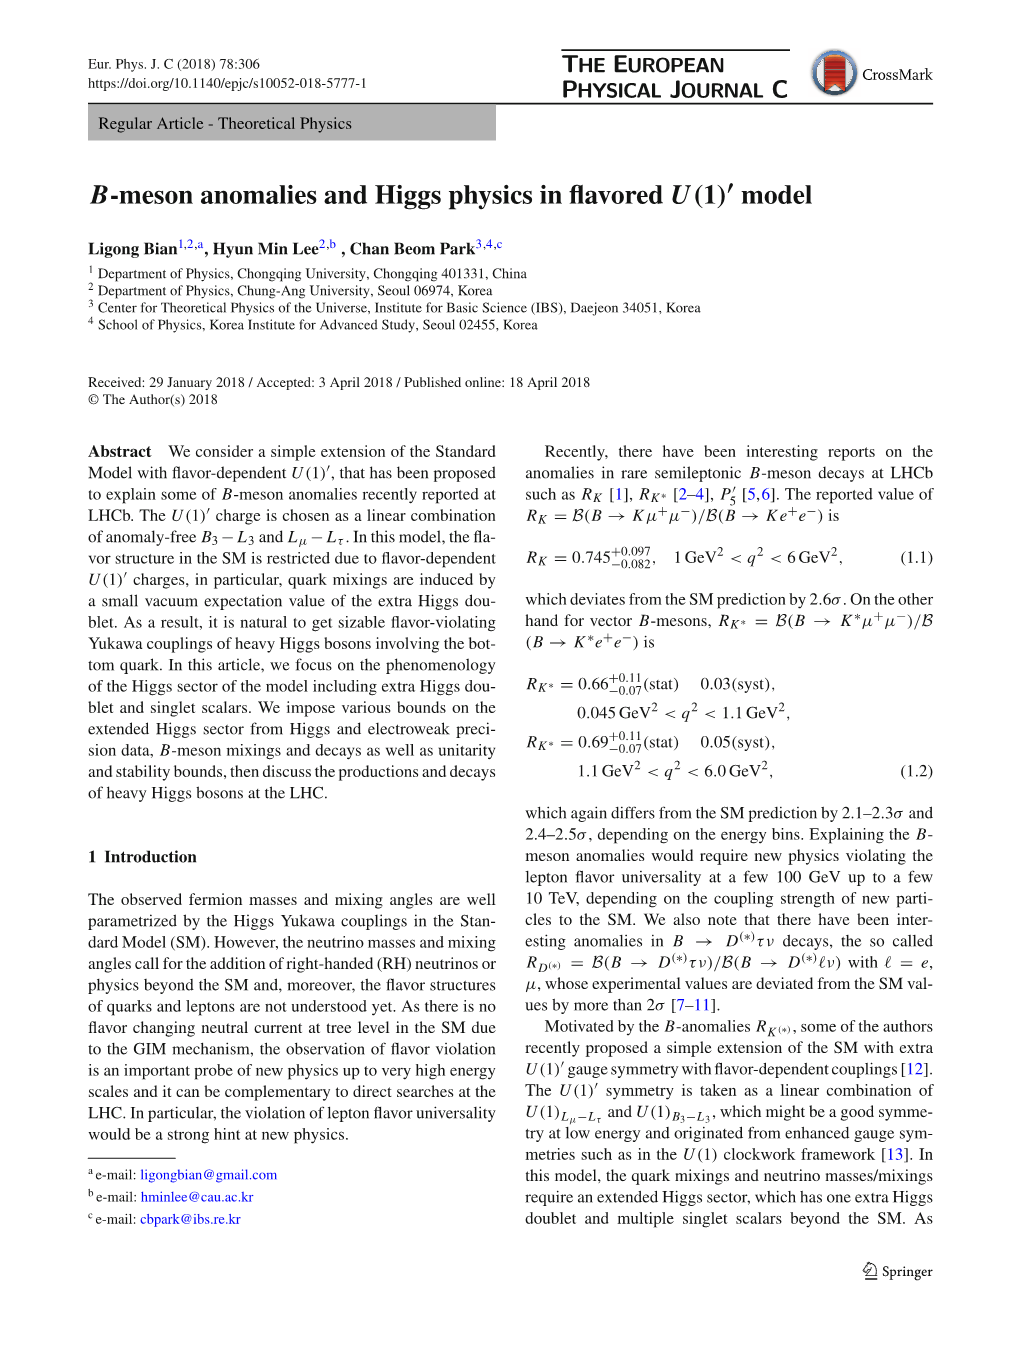 B-Meson Anomalies and Higgs Physics in Flavored Model